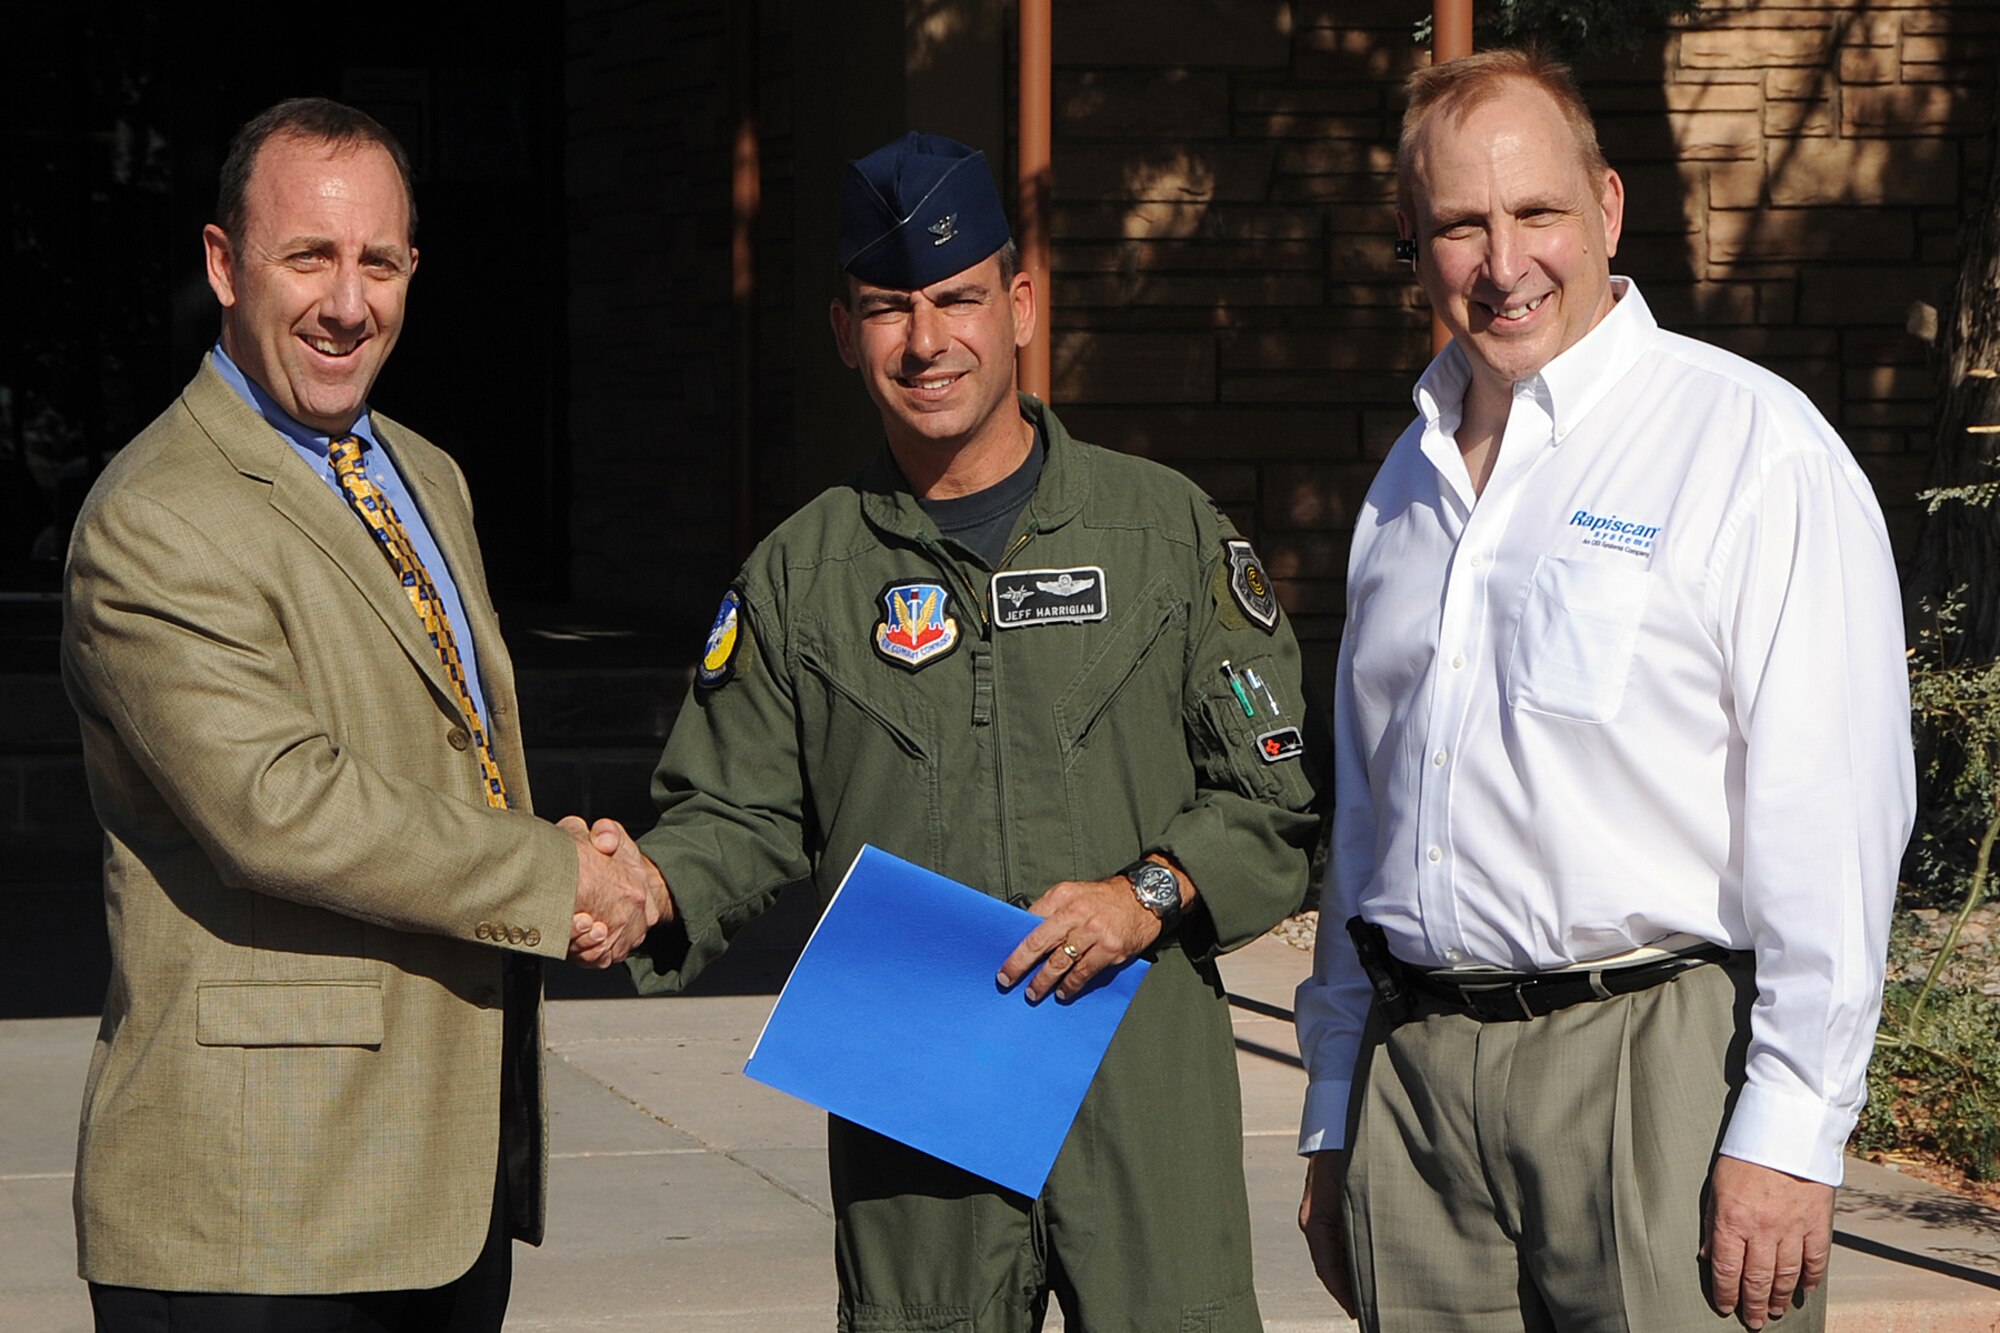 Mr. Ed Mason, IED Defeat Program Office Division Chief, shakes hands with Col. Jeff Harrigian, 49th Fighter Wing commander, along with Mr. John Kuntz, Rapiscan Systems Inc, Manager of Military Sales. Rapiscan Systems donated two Gamma Ray Detection Systems to Holloman Air Force Base, N.M., October 29. Each of the systems is valued at more than one million dollars and are capable of scanning a vehicle for dangerous materials in as little as 30 seconds. (U.S. Air Force photo/Tech. Sgt Chris Flahive)